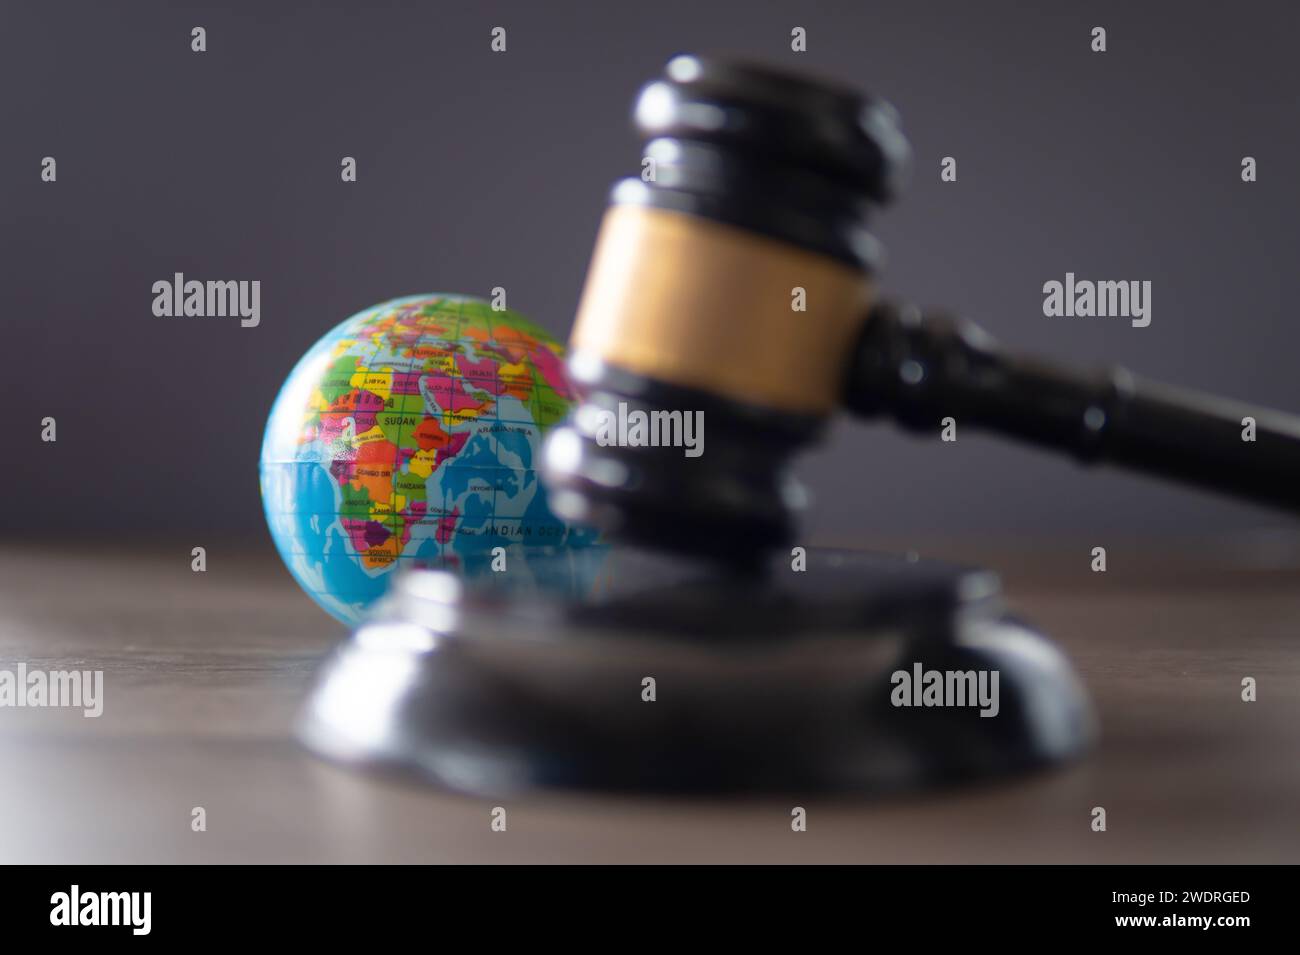 Closeup image of judge gavel and world globe on table. International law concept. Stock Photo